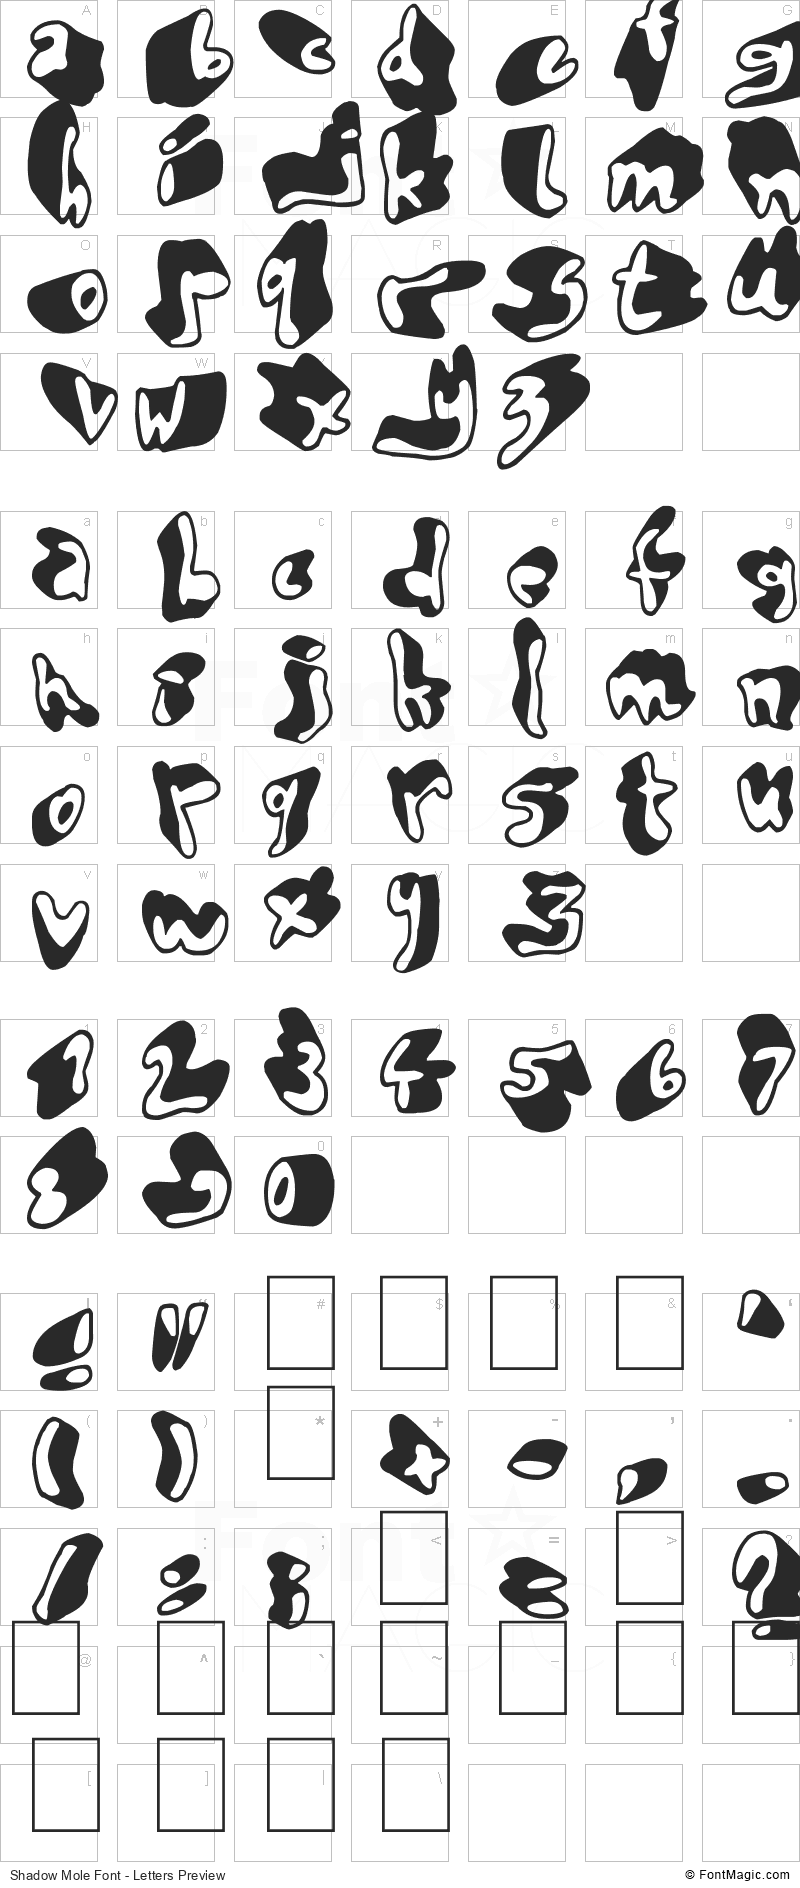 Shadow Mole Font - All Latters Preview Chart